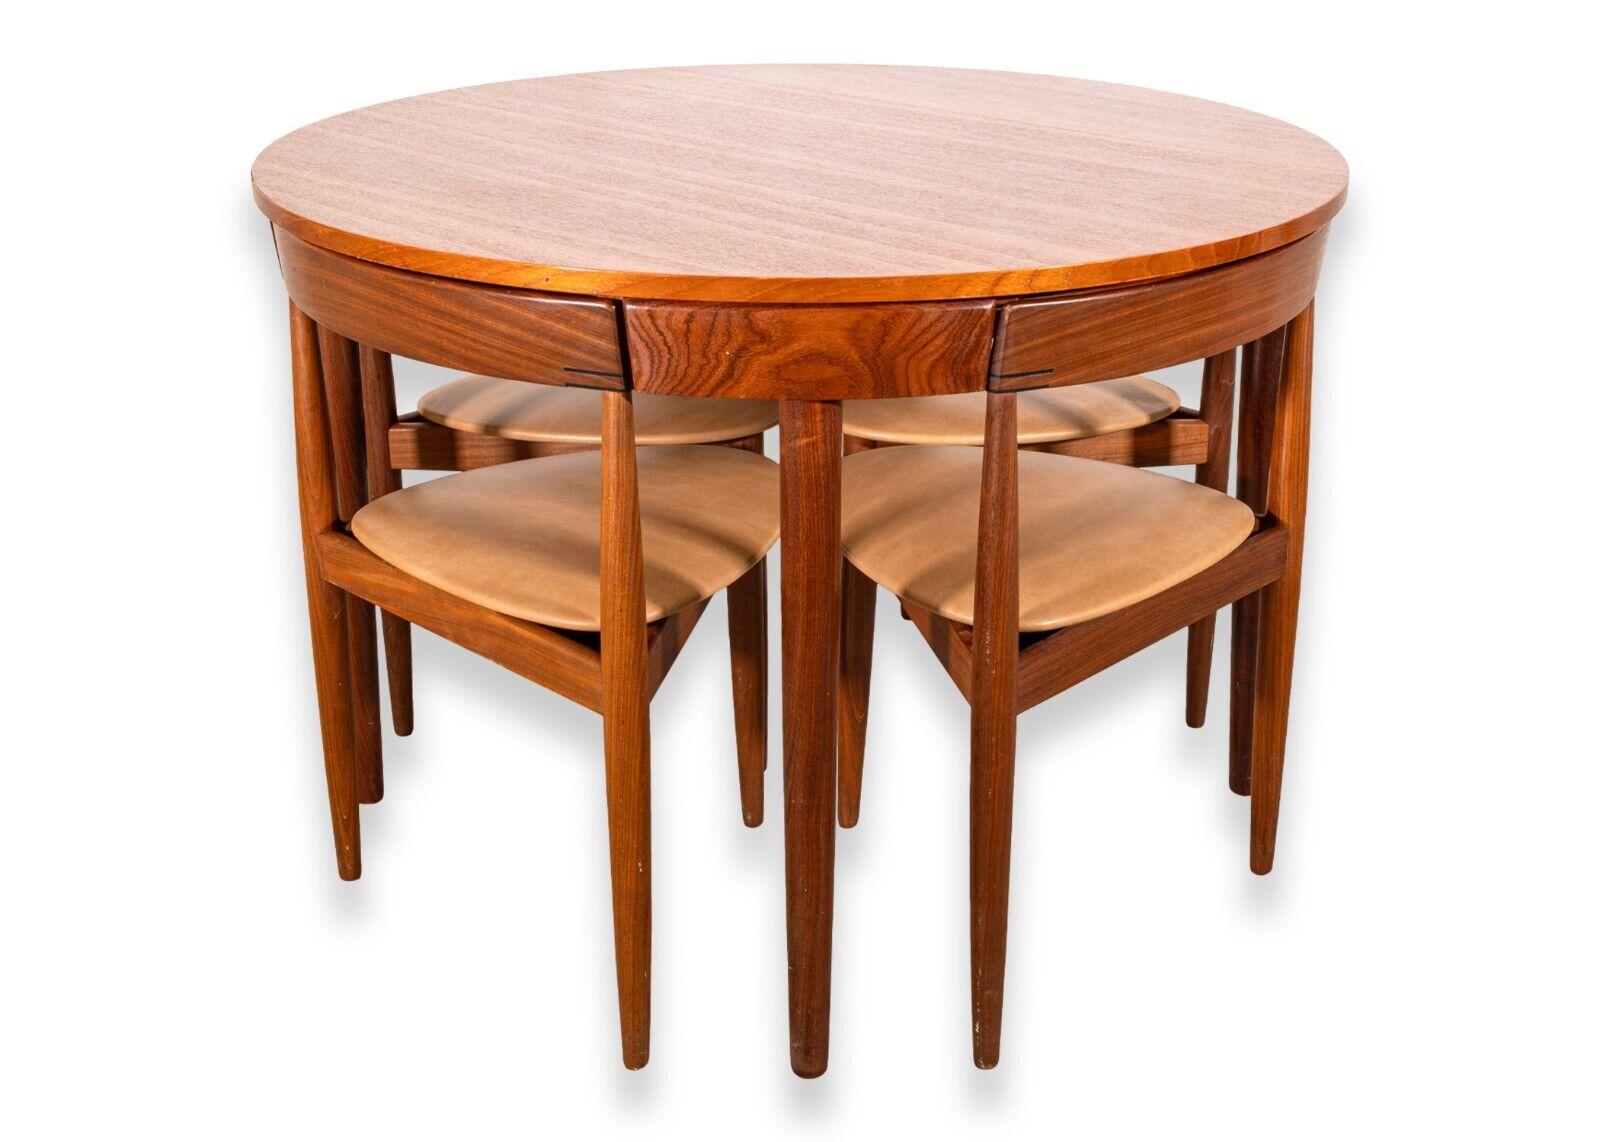 A Hans Olsen for Frem Rojle teak Danish dinette nesting game table and 4 chairs. A fantastic dinette set with classic Danish design. This set designed by Hans Olsen for Frem Rojle features a full teak wood construction, a circular table top, and a